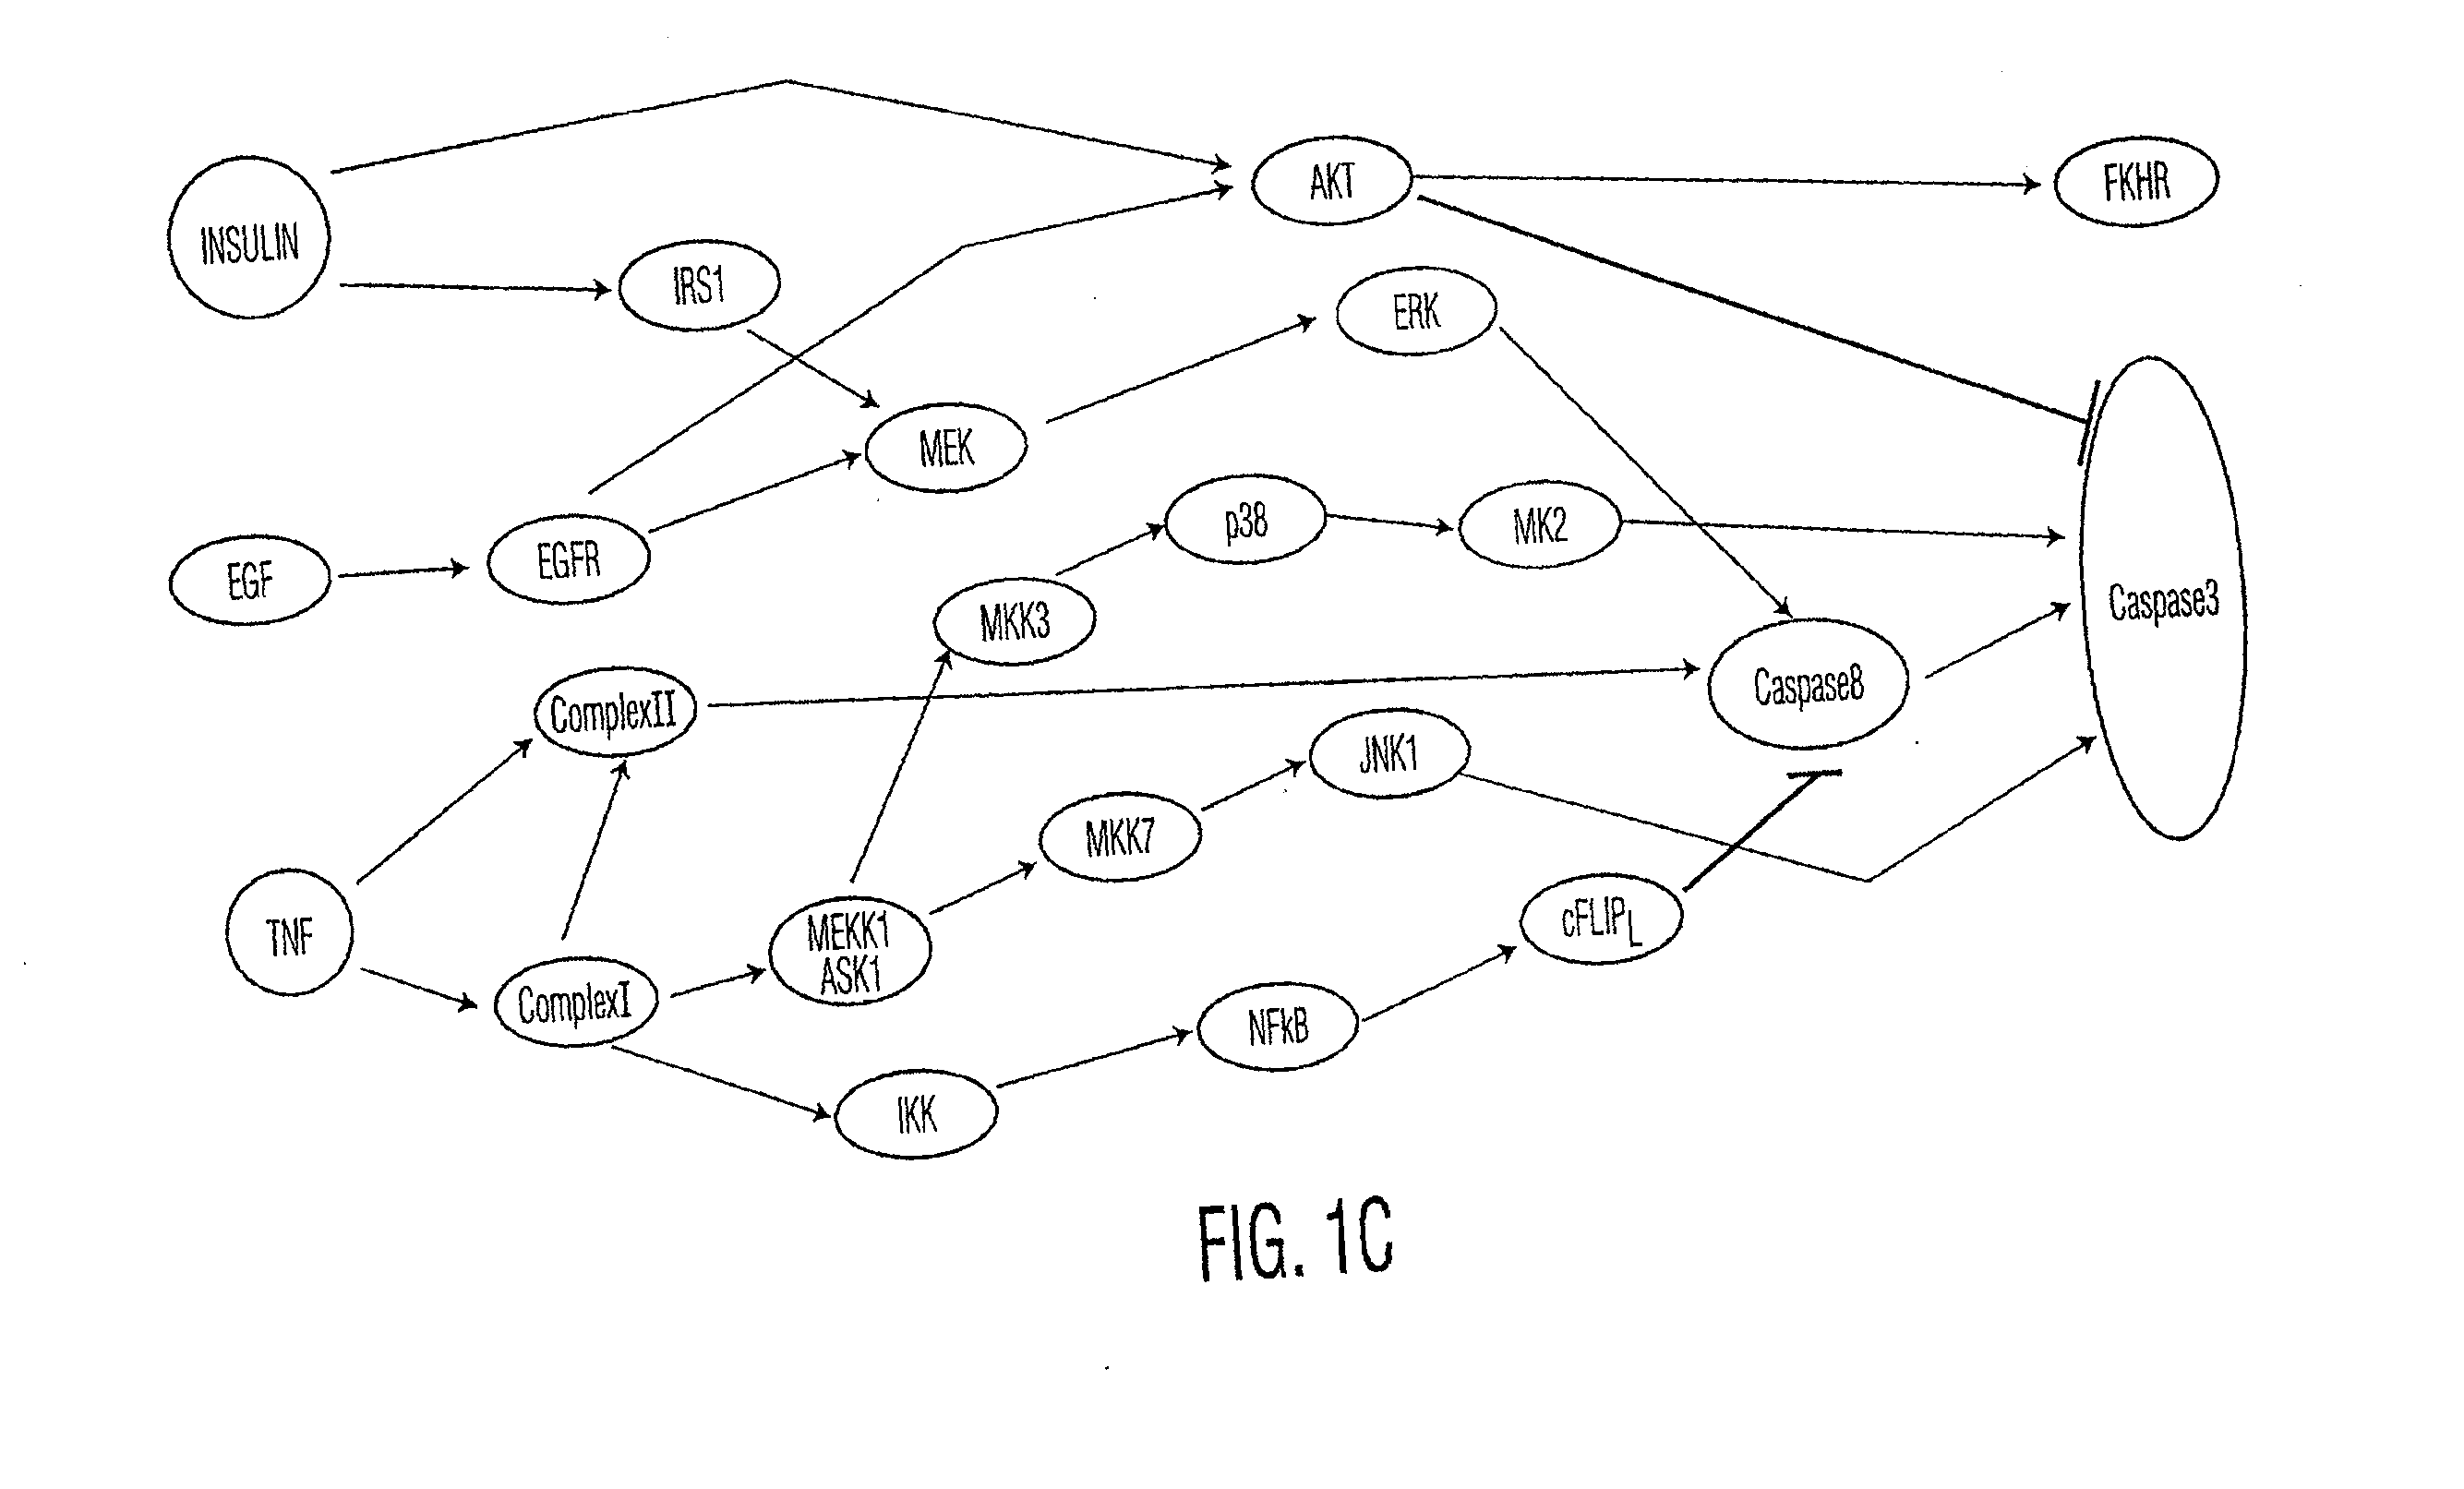 Systems and methods for fault diagnosis in molecular networks